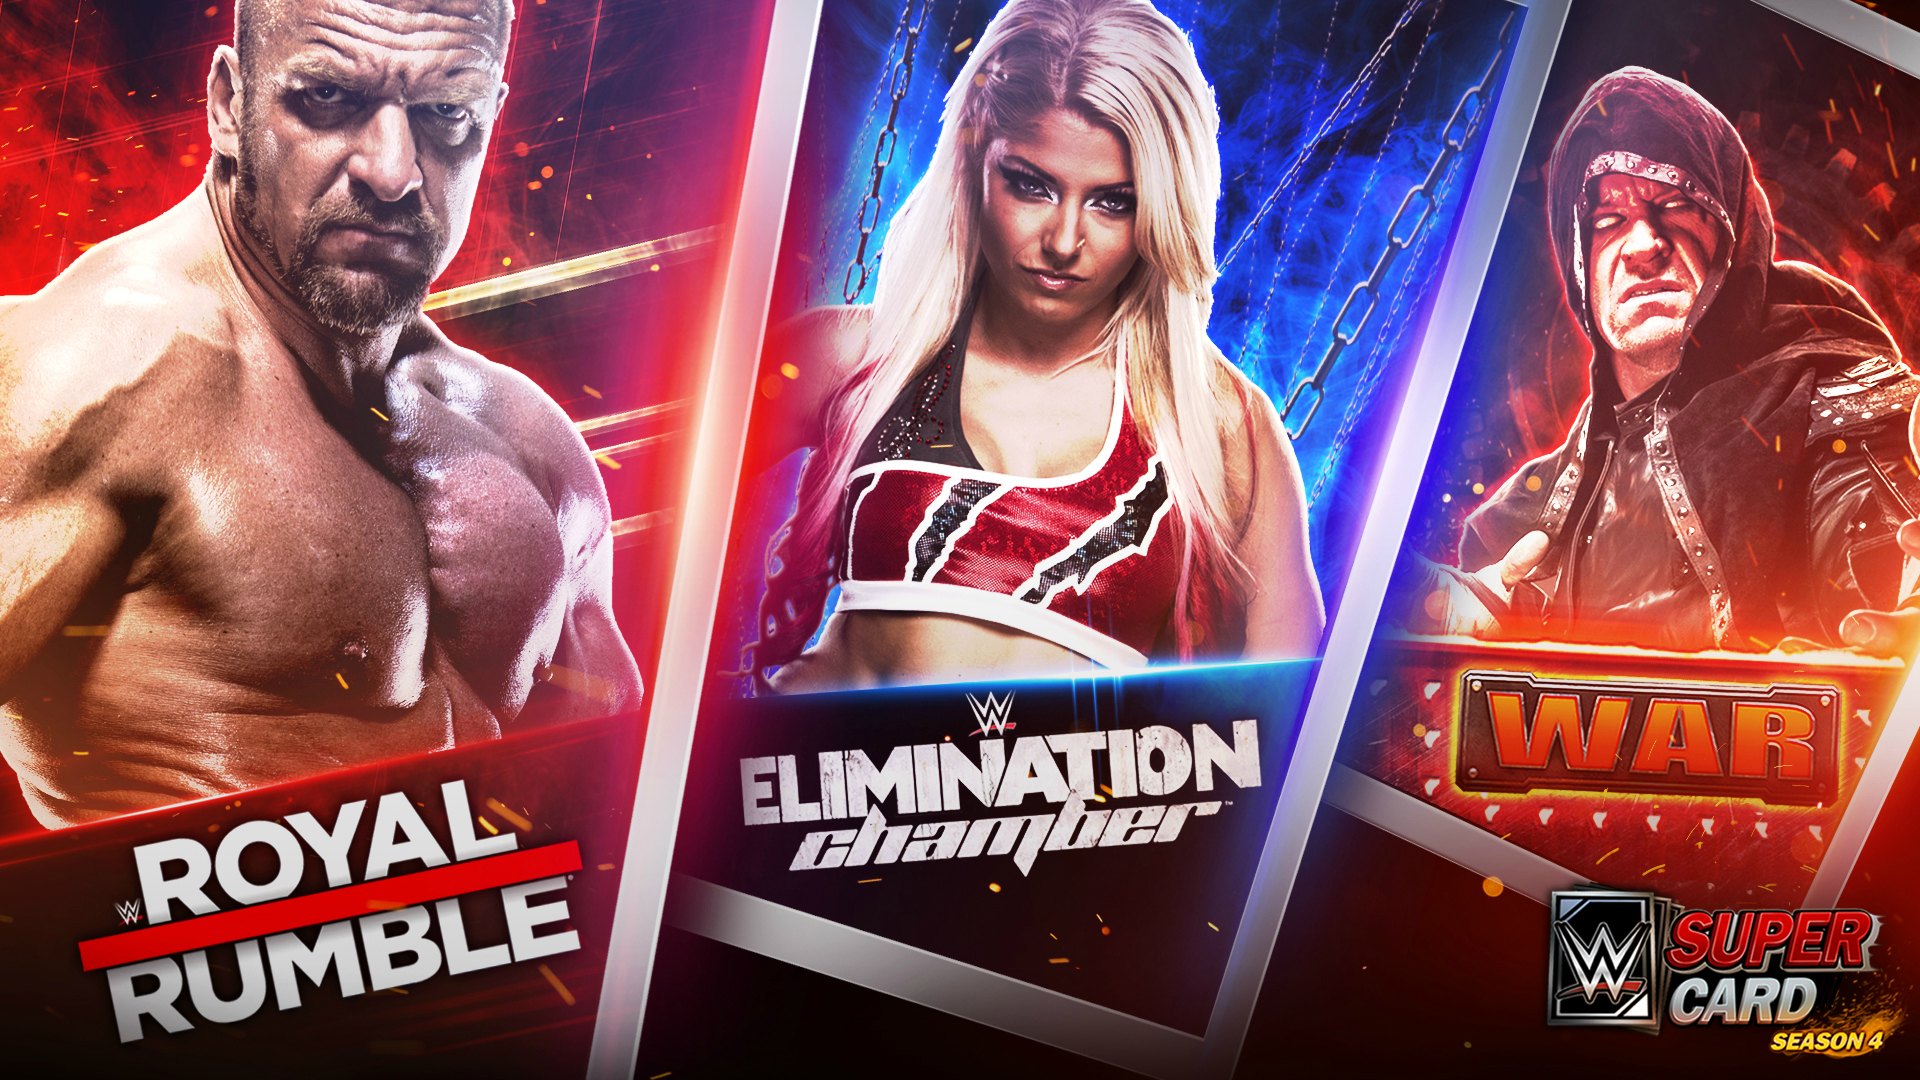 Free download WWE SuperCard Season 4 Details on New Unified PVP Leagues